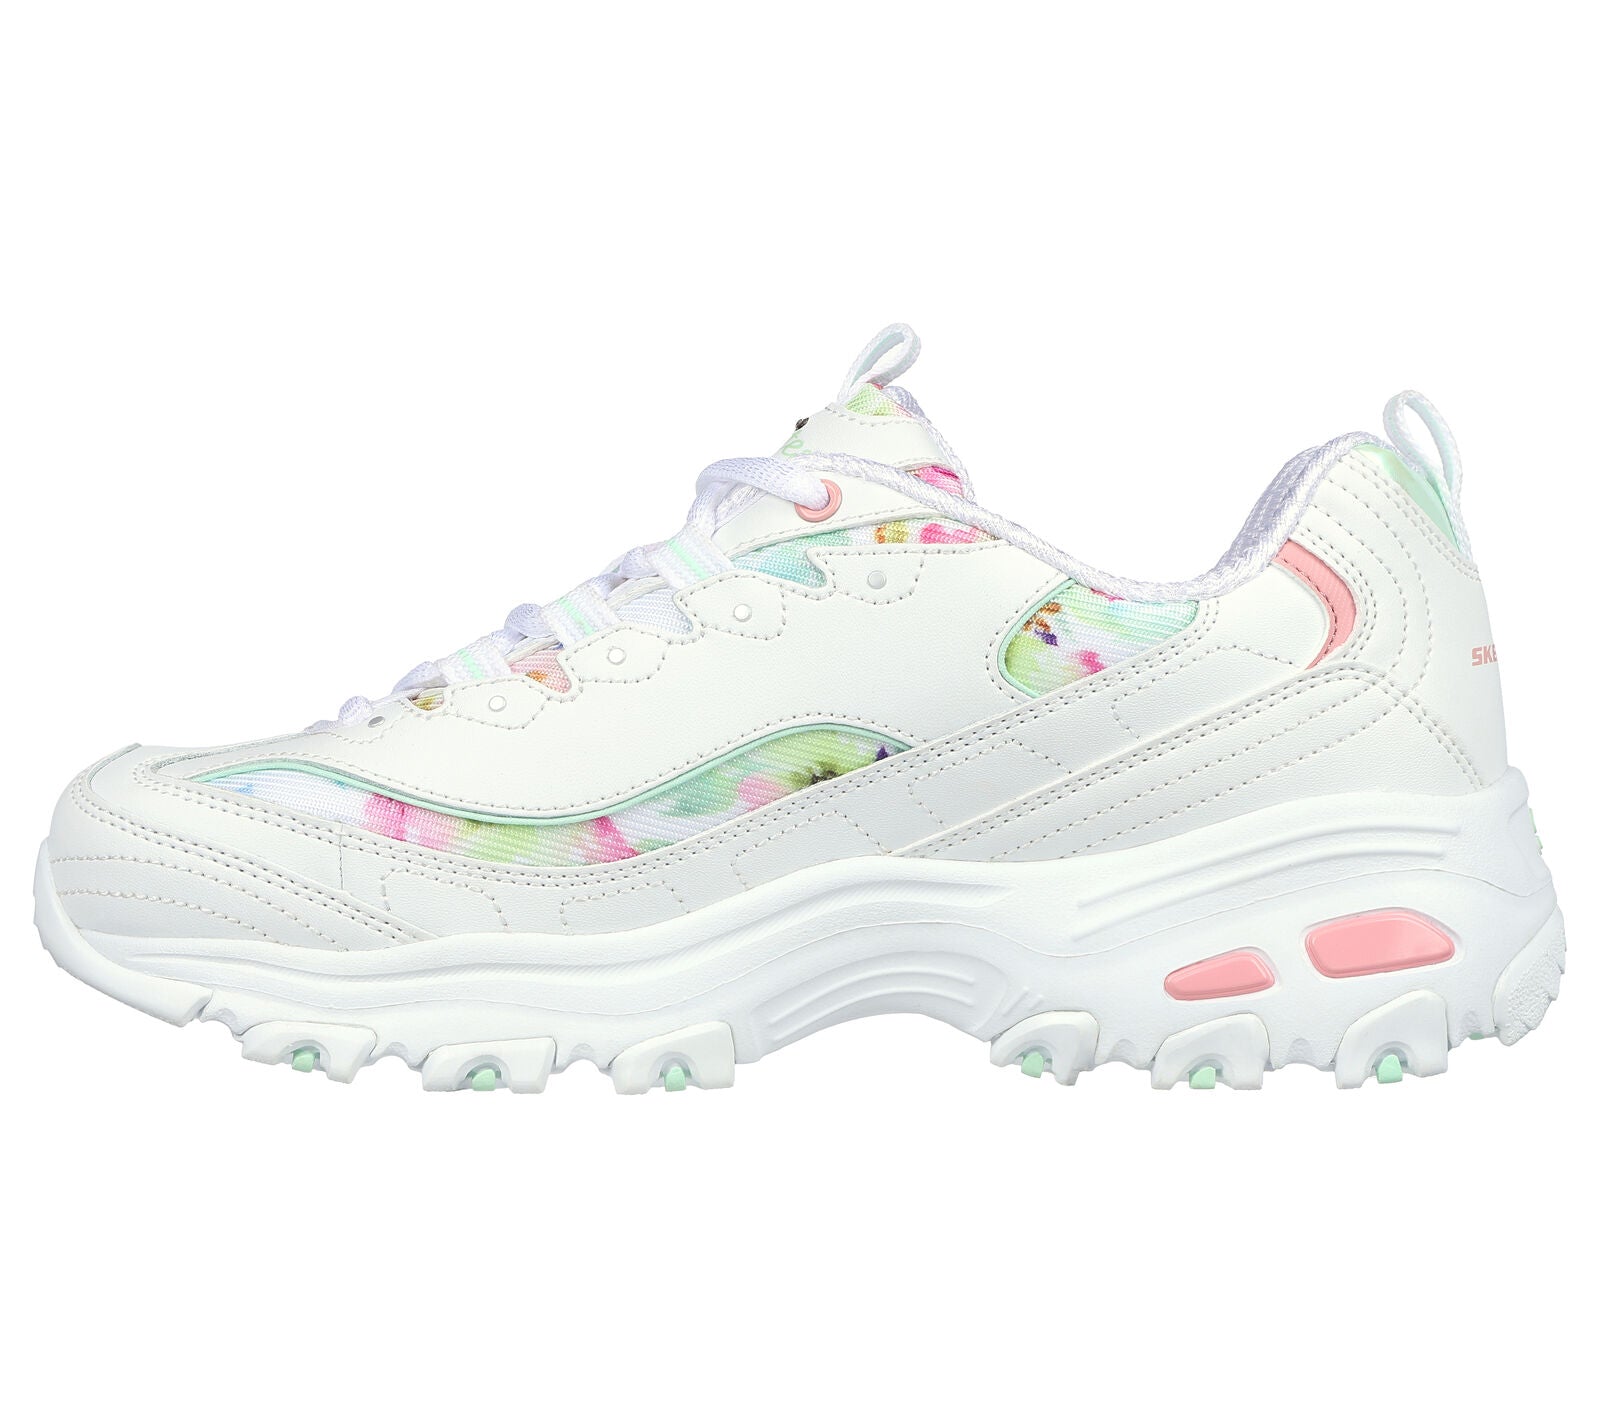 Skechers 149794 D’Lites Blooming Fields Ladies White Multi Leather & Textile Lace Up Trainers